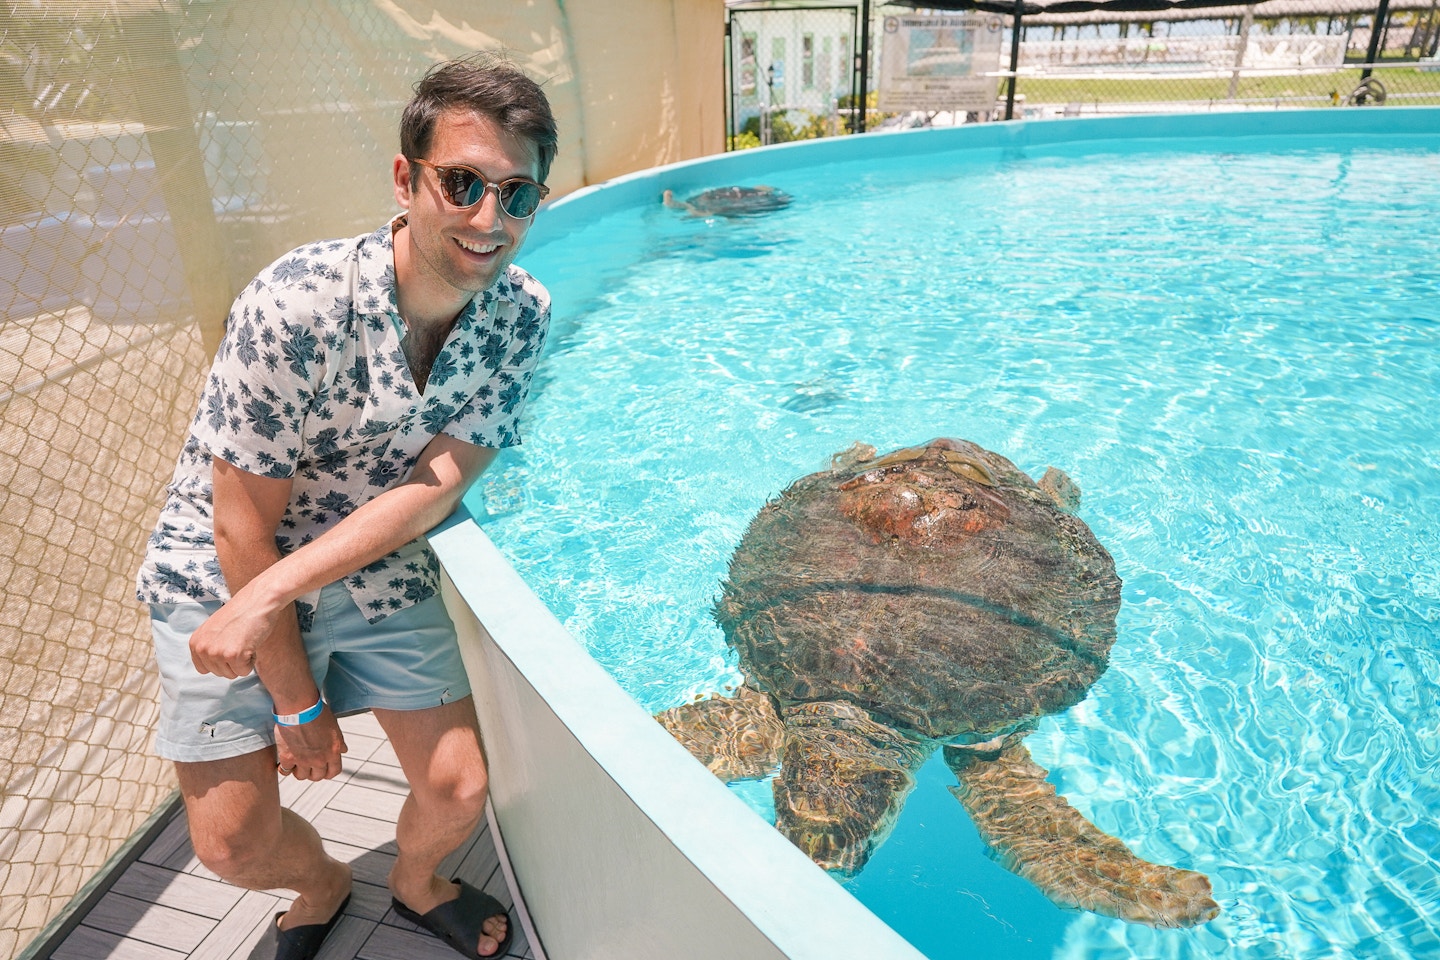 The Marathon Turtle Hospital is a fun thing to do in Marathon Florida - and the turtles are so cute!